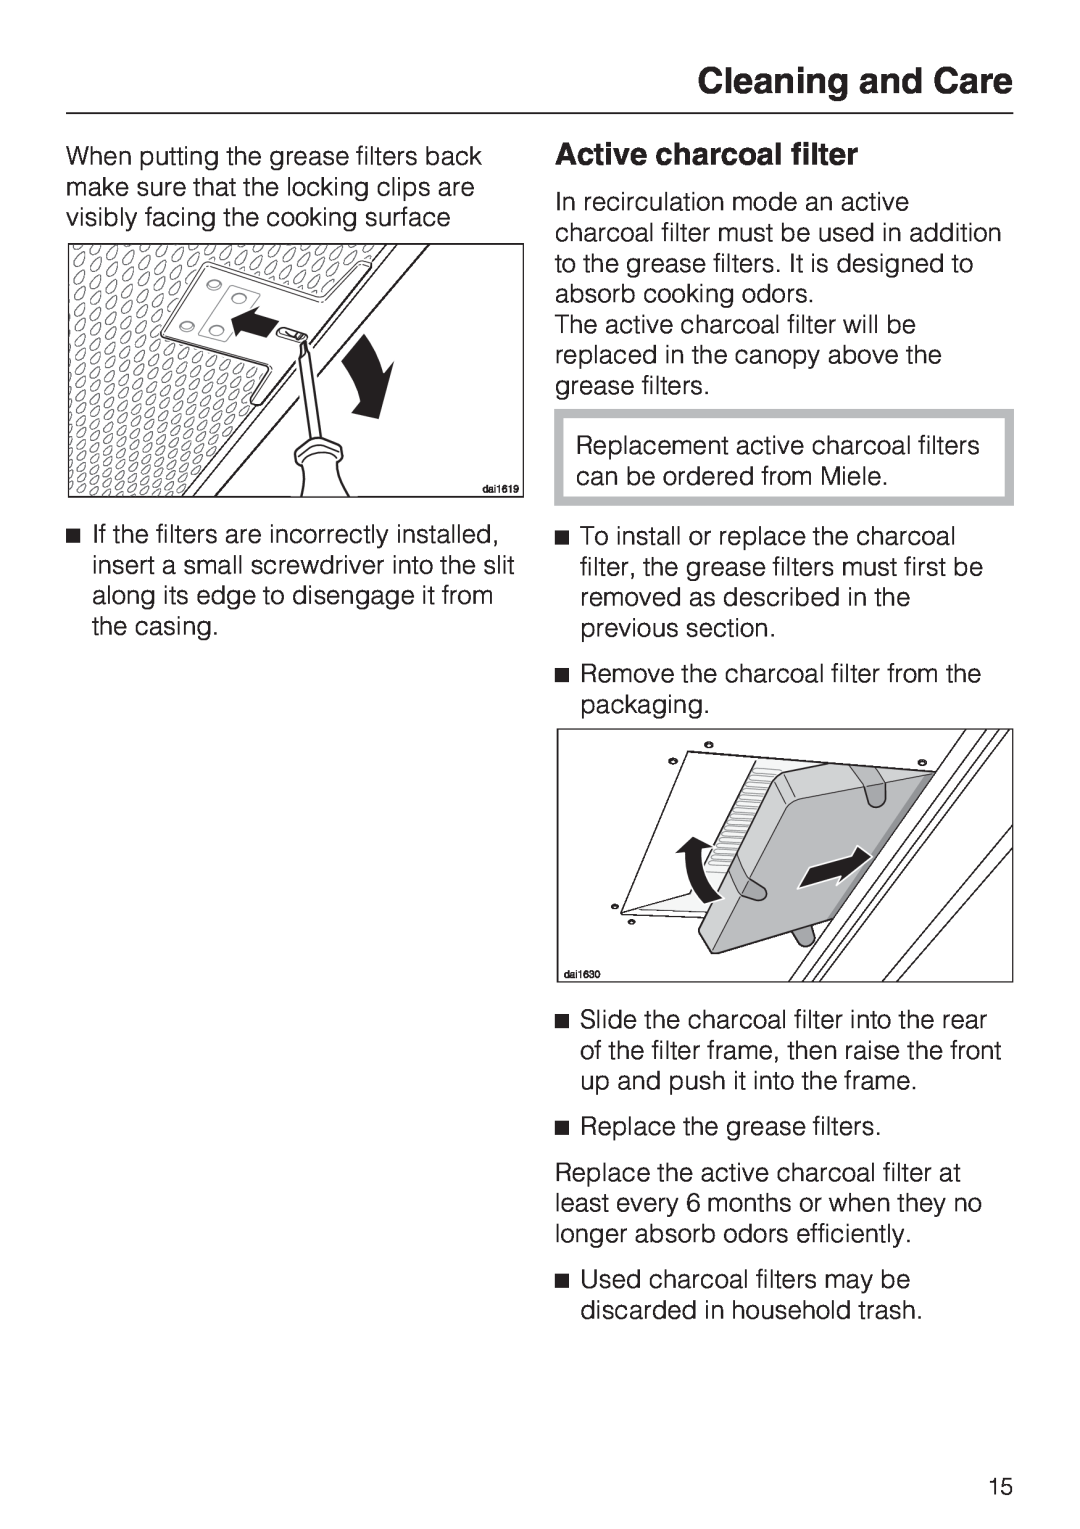 Miele DA 398-5, DA 399-5 installation instructions Active charcoal filter, Cleaning and Care 